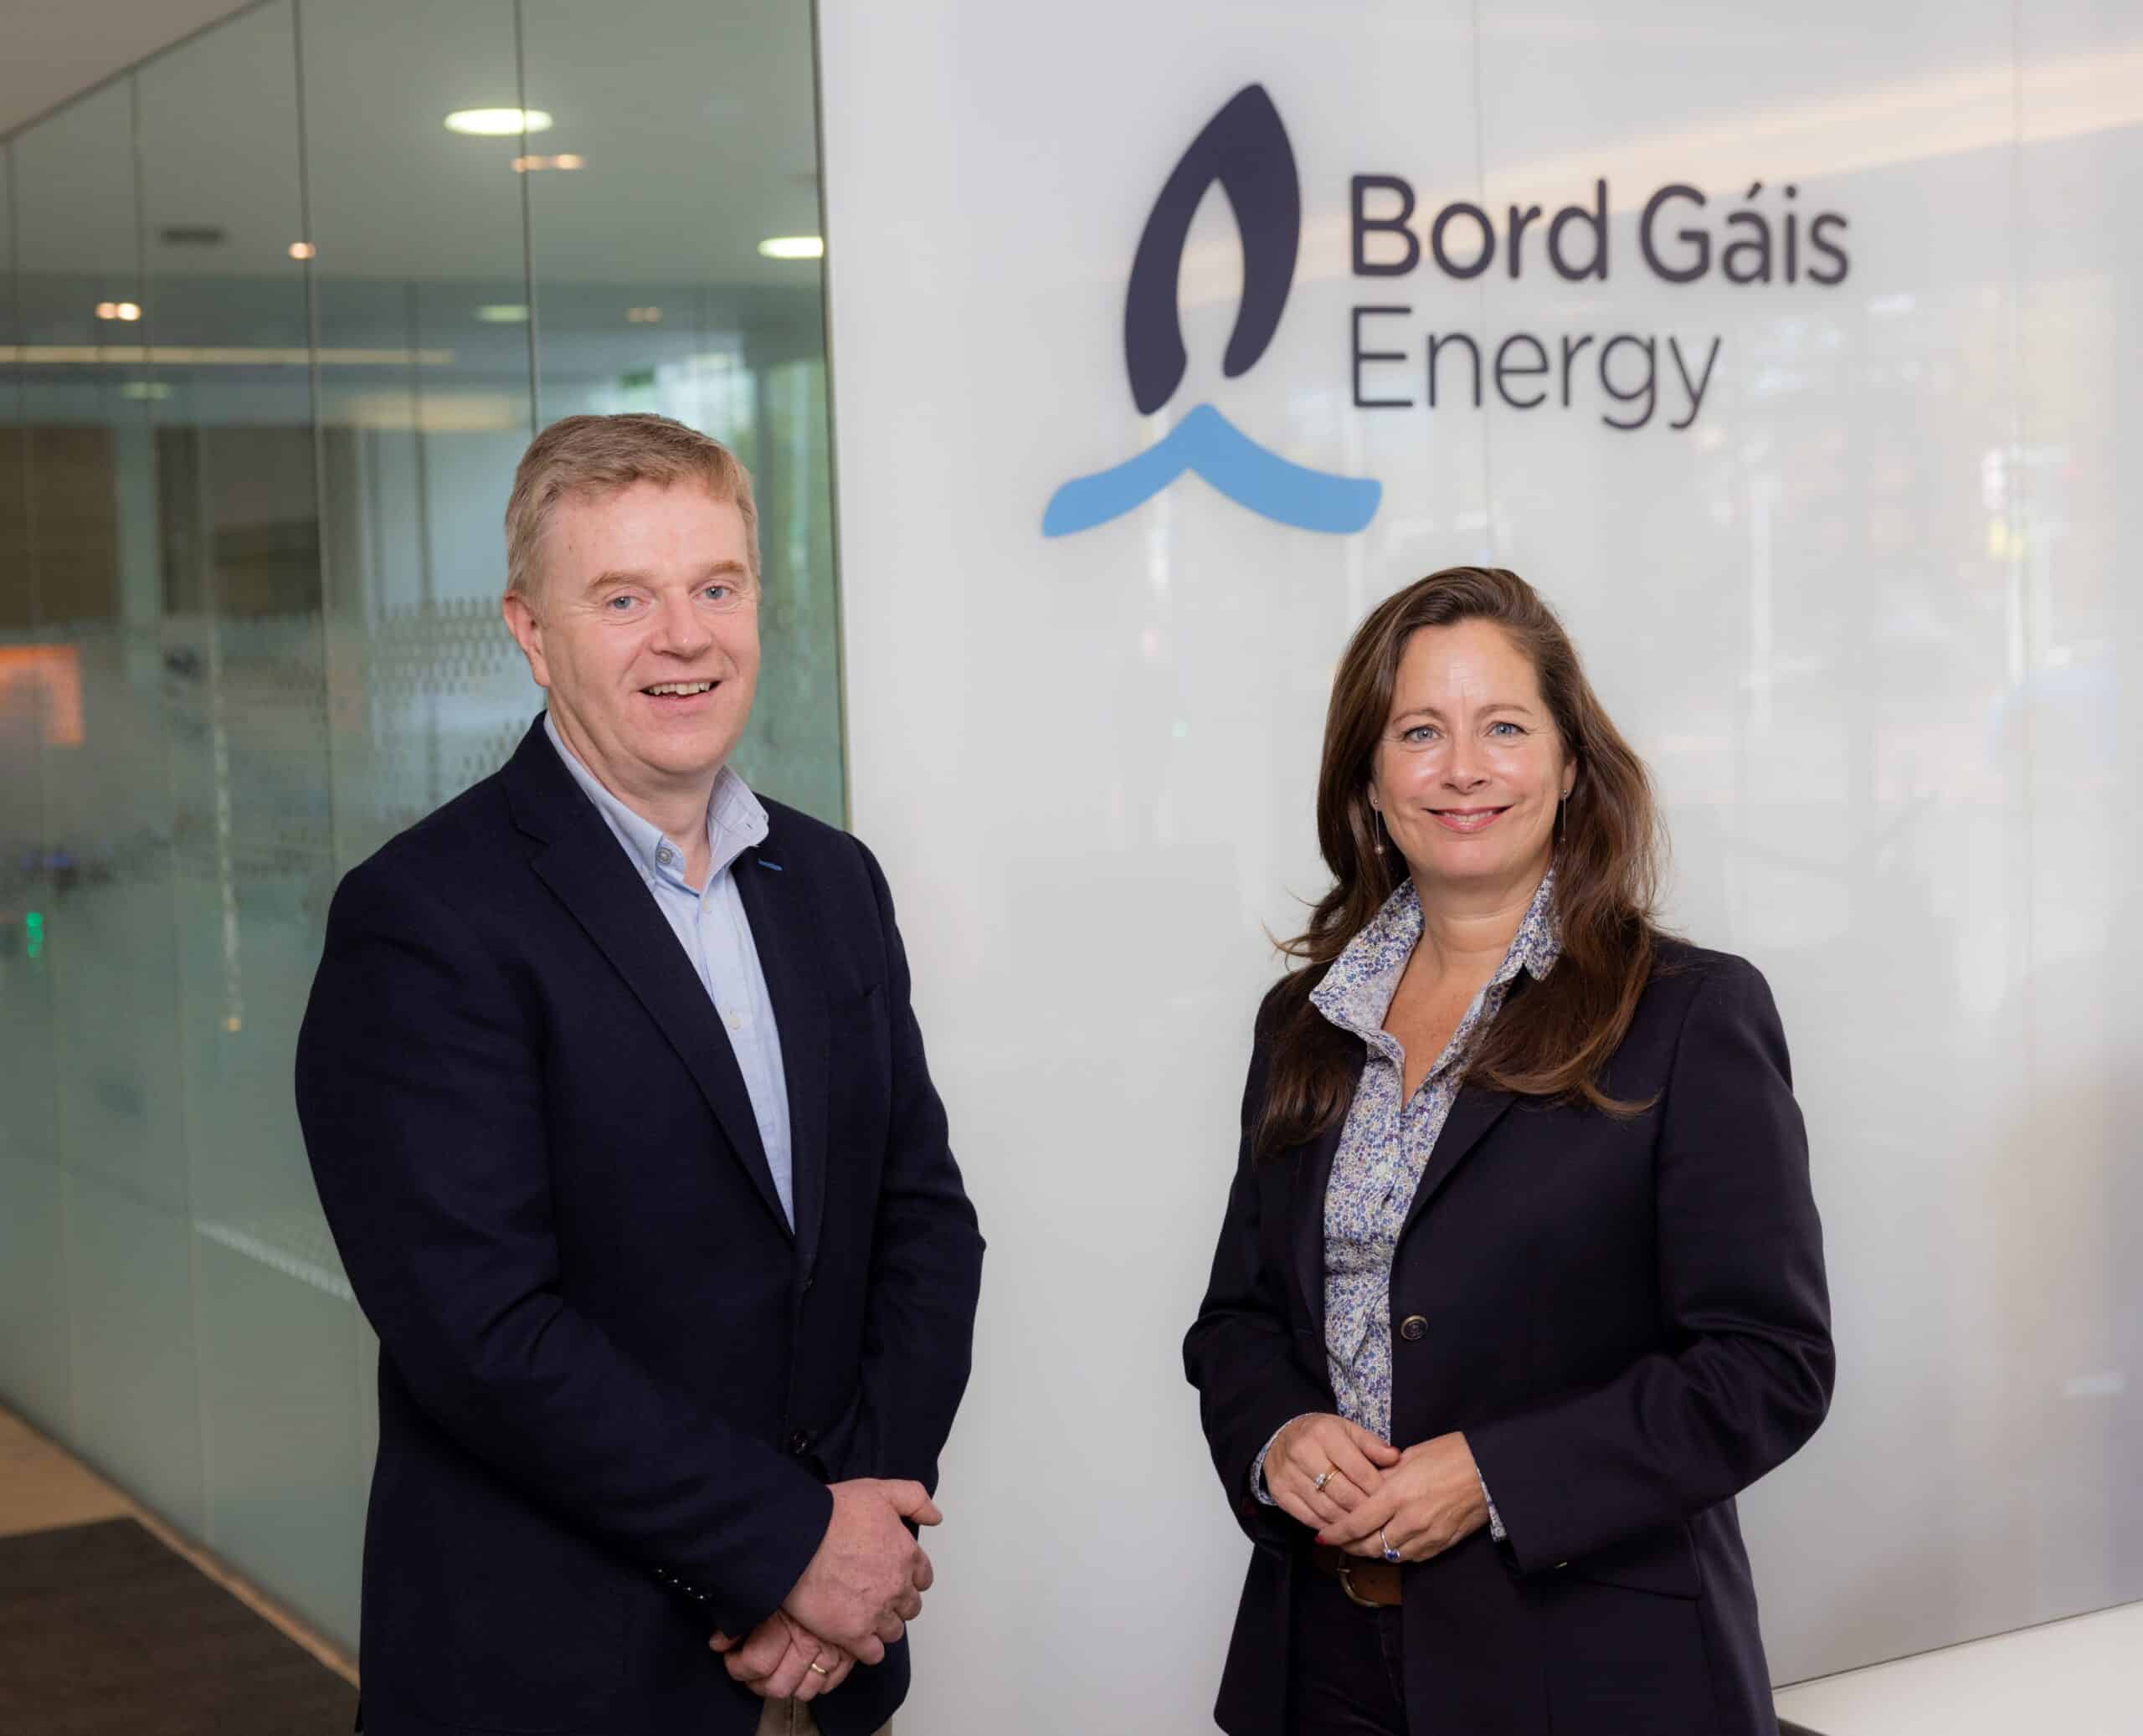 Denis O’Sullivan and Kerry McConnell being appointed as Director of Assets and Chief Financial Officer, respectively at Bord Gais Energy an energy supply and services company